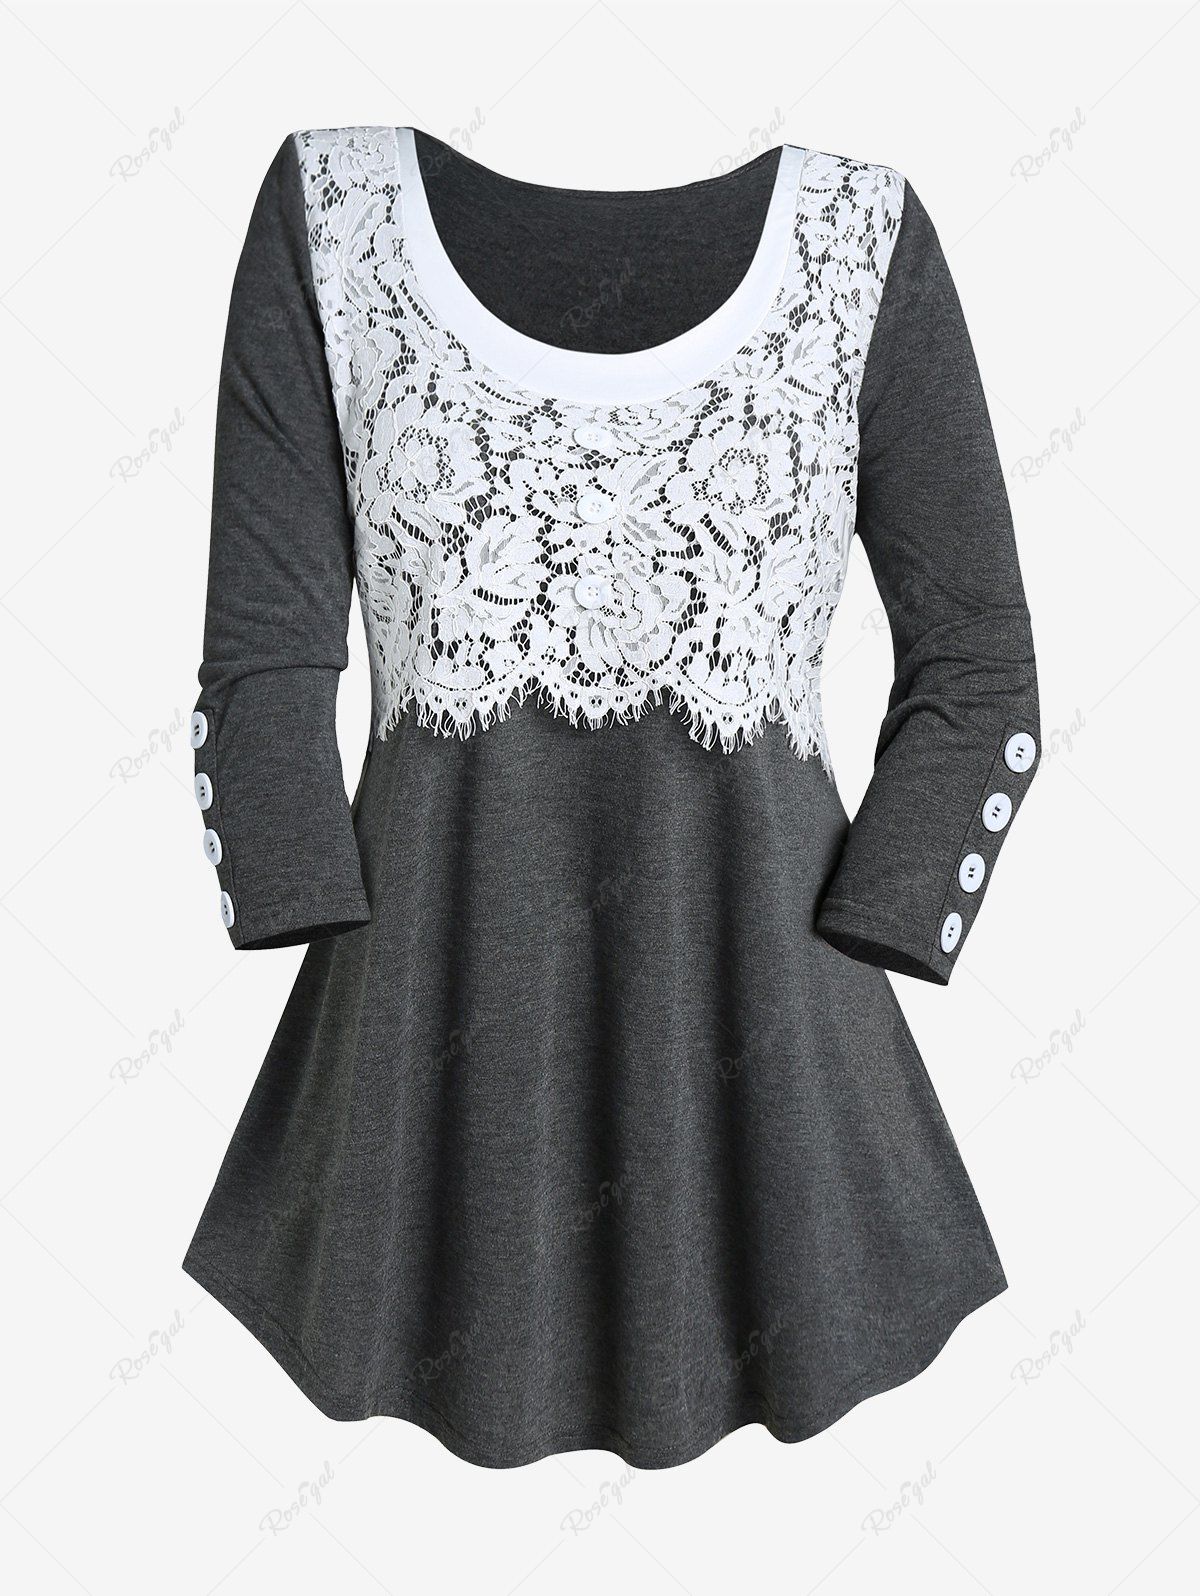 Hot Plus Size Contrast Lace Panel Tee  